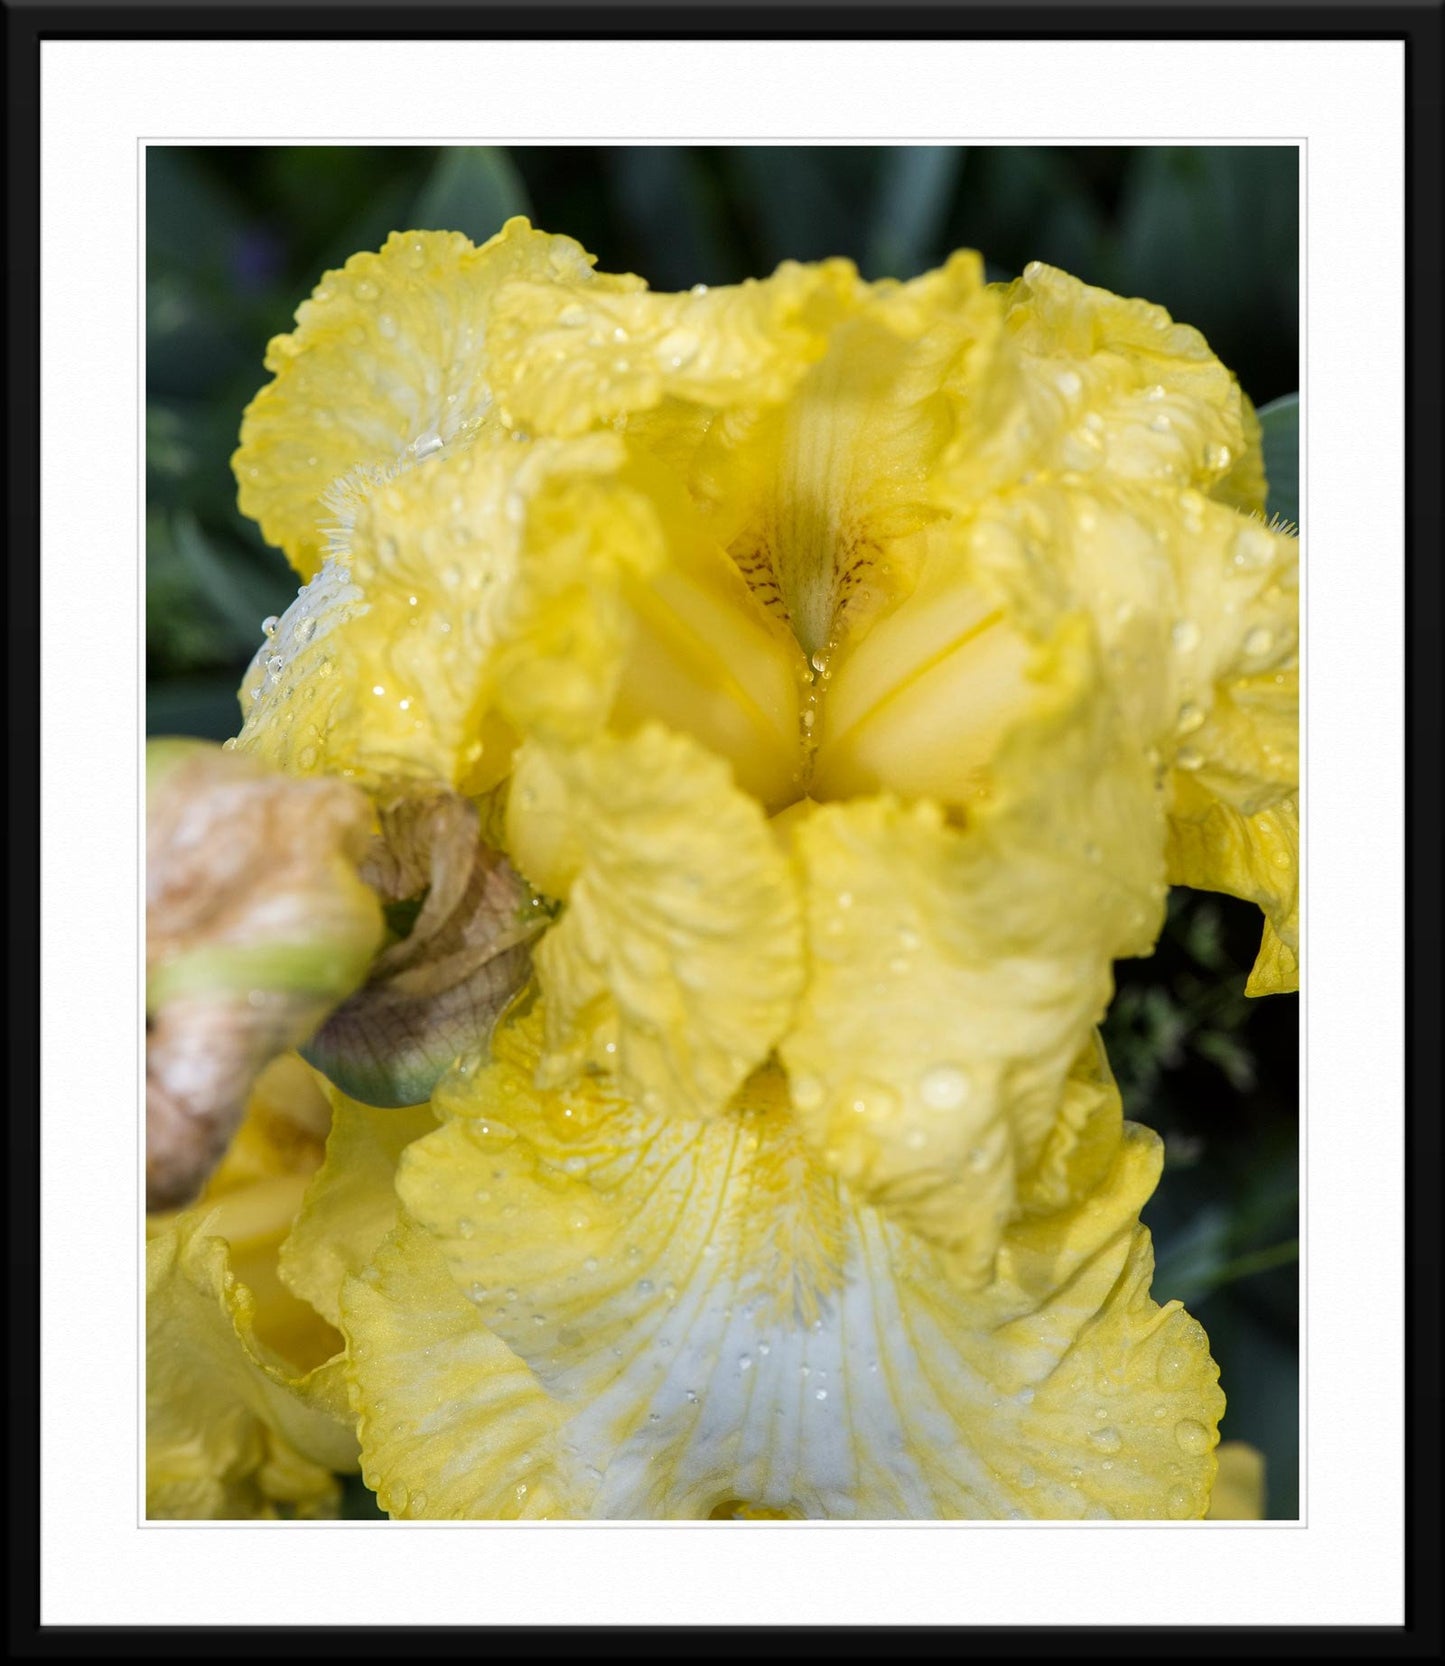 Golden Radiance: A captivating photograph of a bright yellow iris in bloom - Photograph